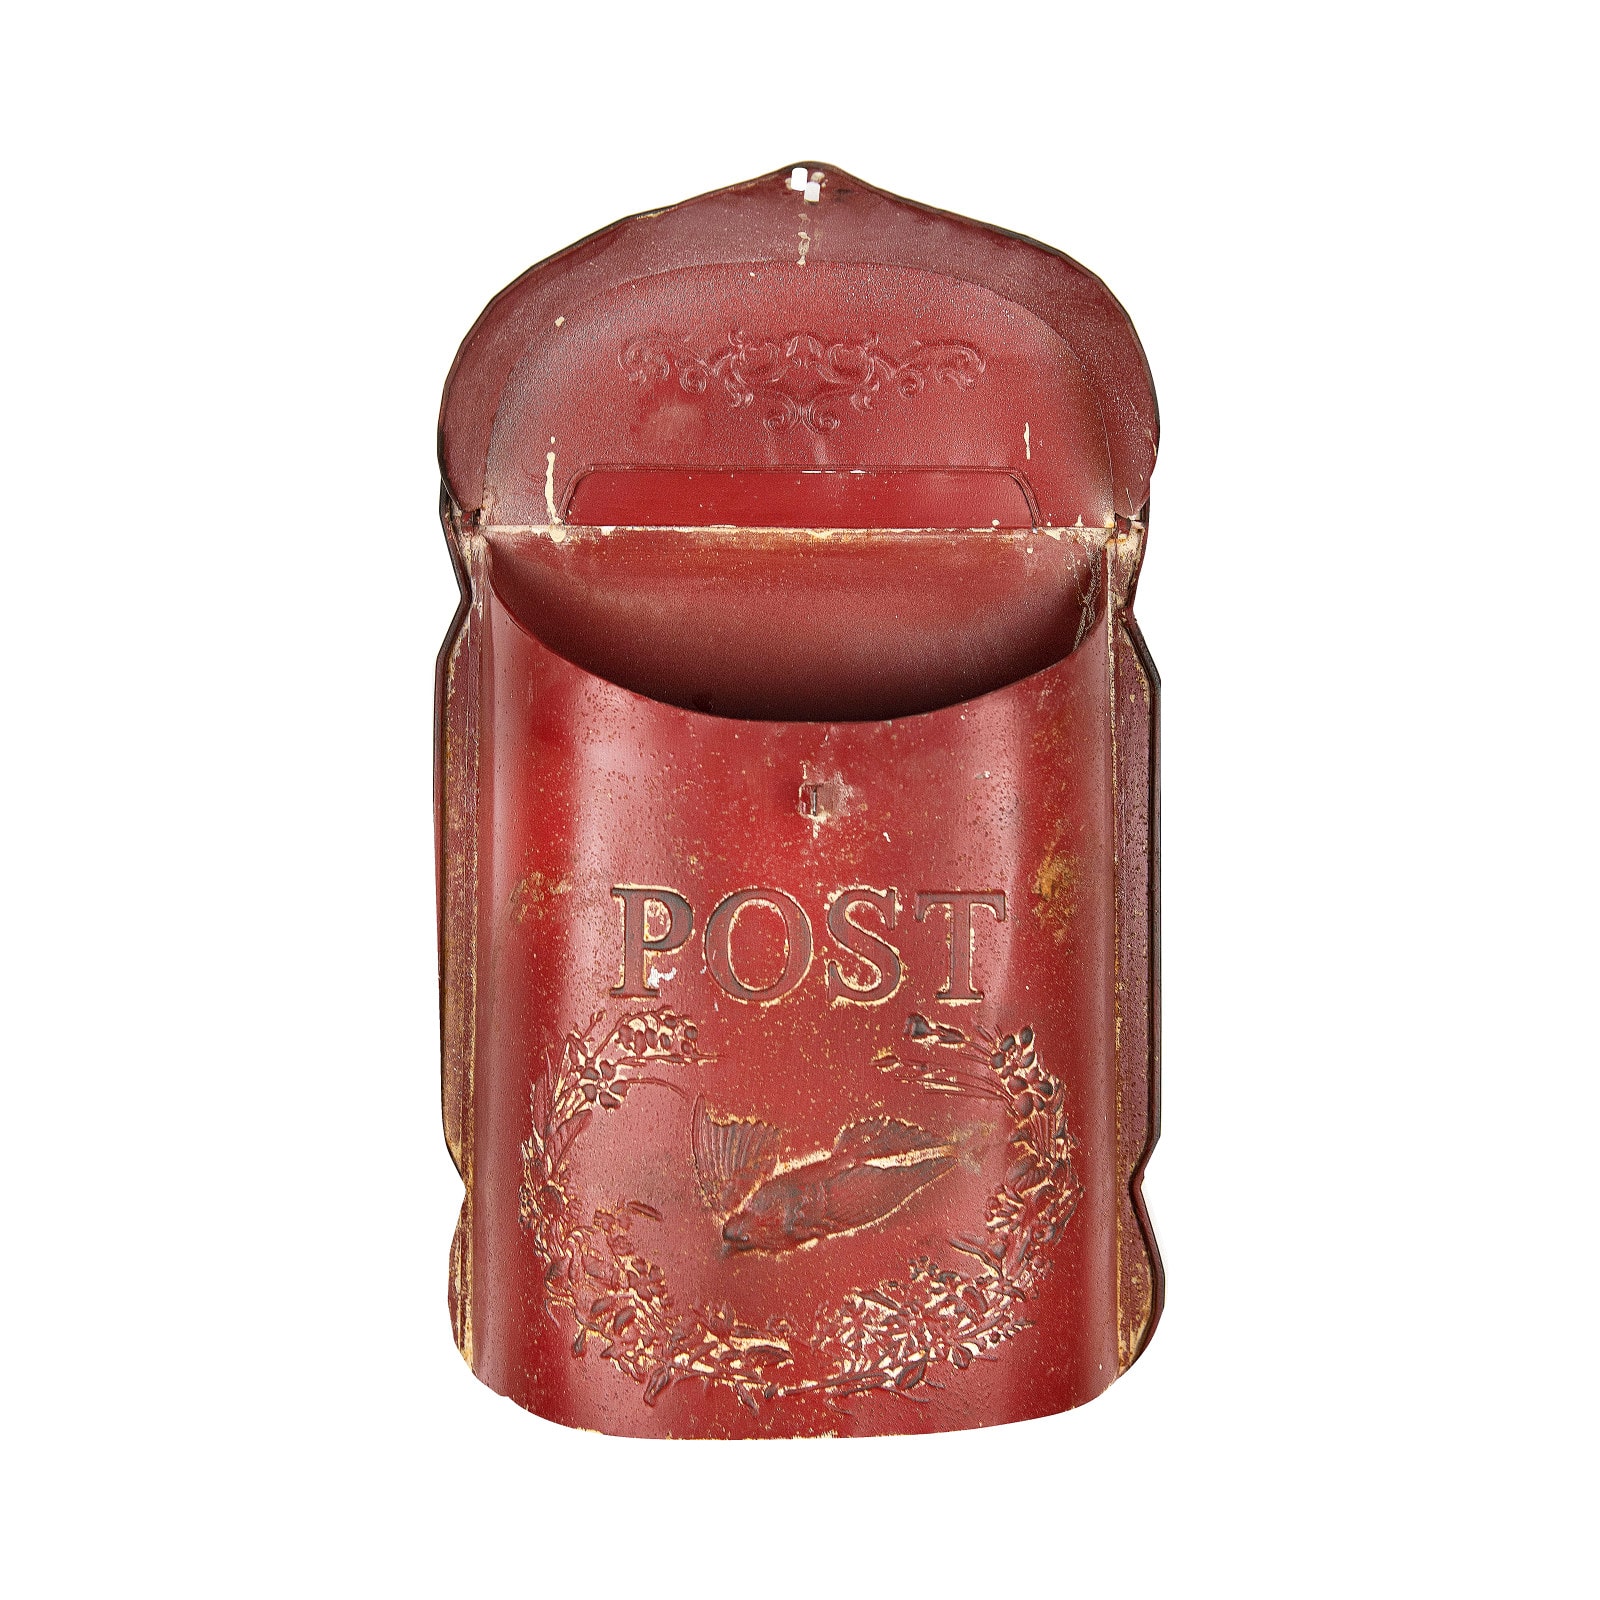 Red Embossed Tin Post Letter Box with Distressed Finish Wall D&#xE9;cor